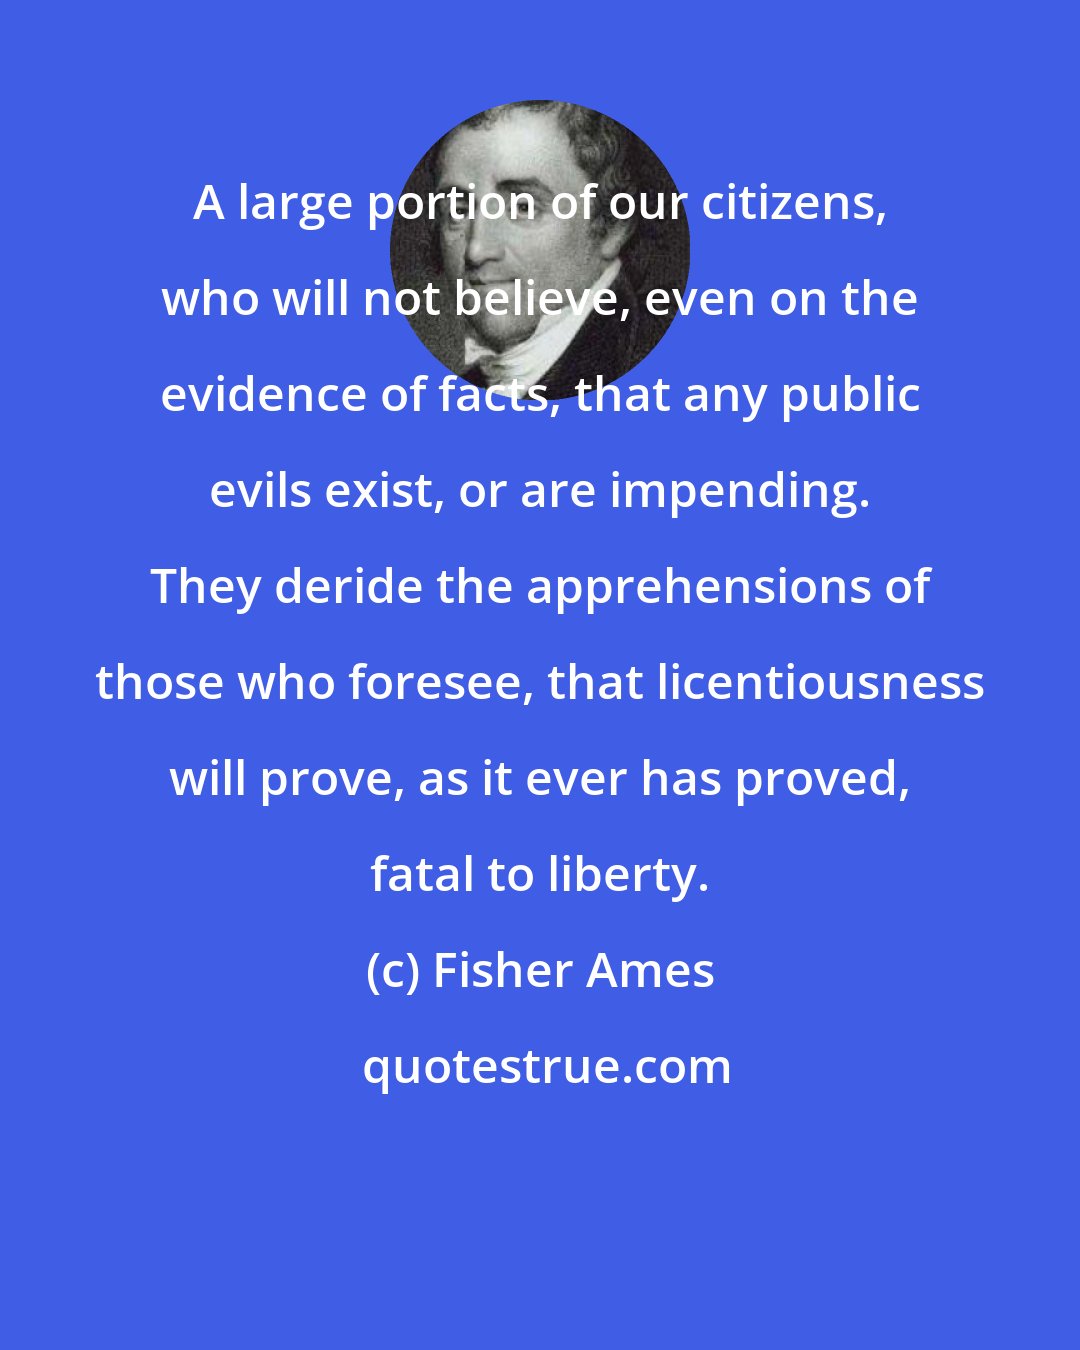 Fisher Ames: A large portion of our citizens, who will not believe, even on the evidence of facts, that any public evils exist, or are impending. They deride the apprehensions of those who foresee, that licentiousness will prove, as it ever has proved, fatal to liberty.